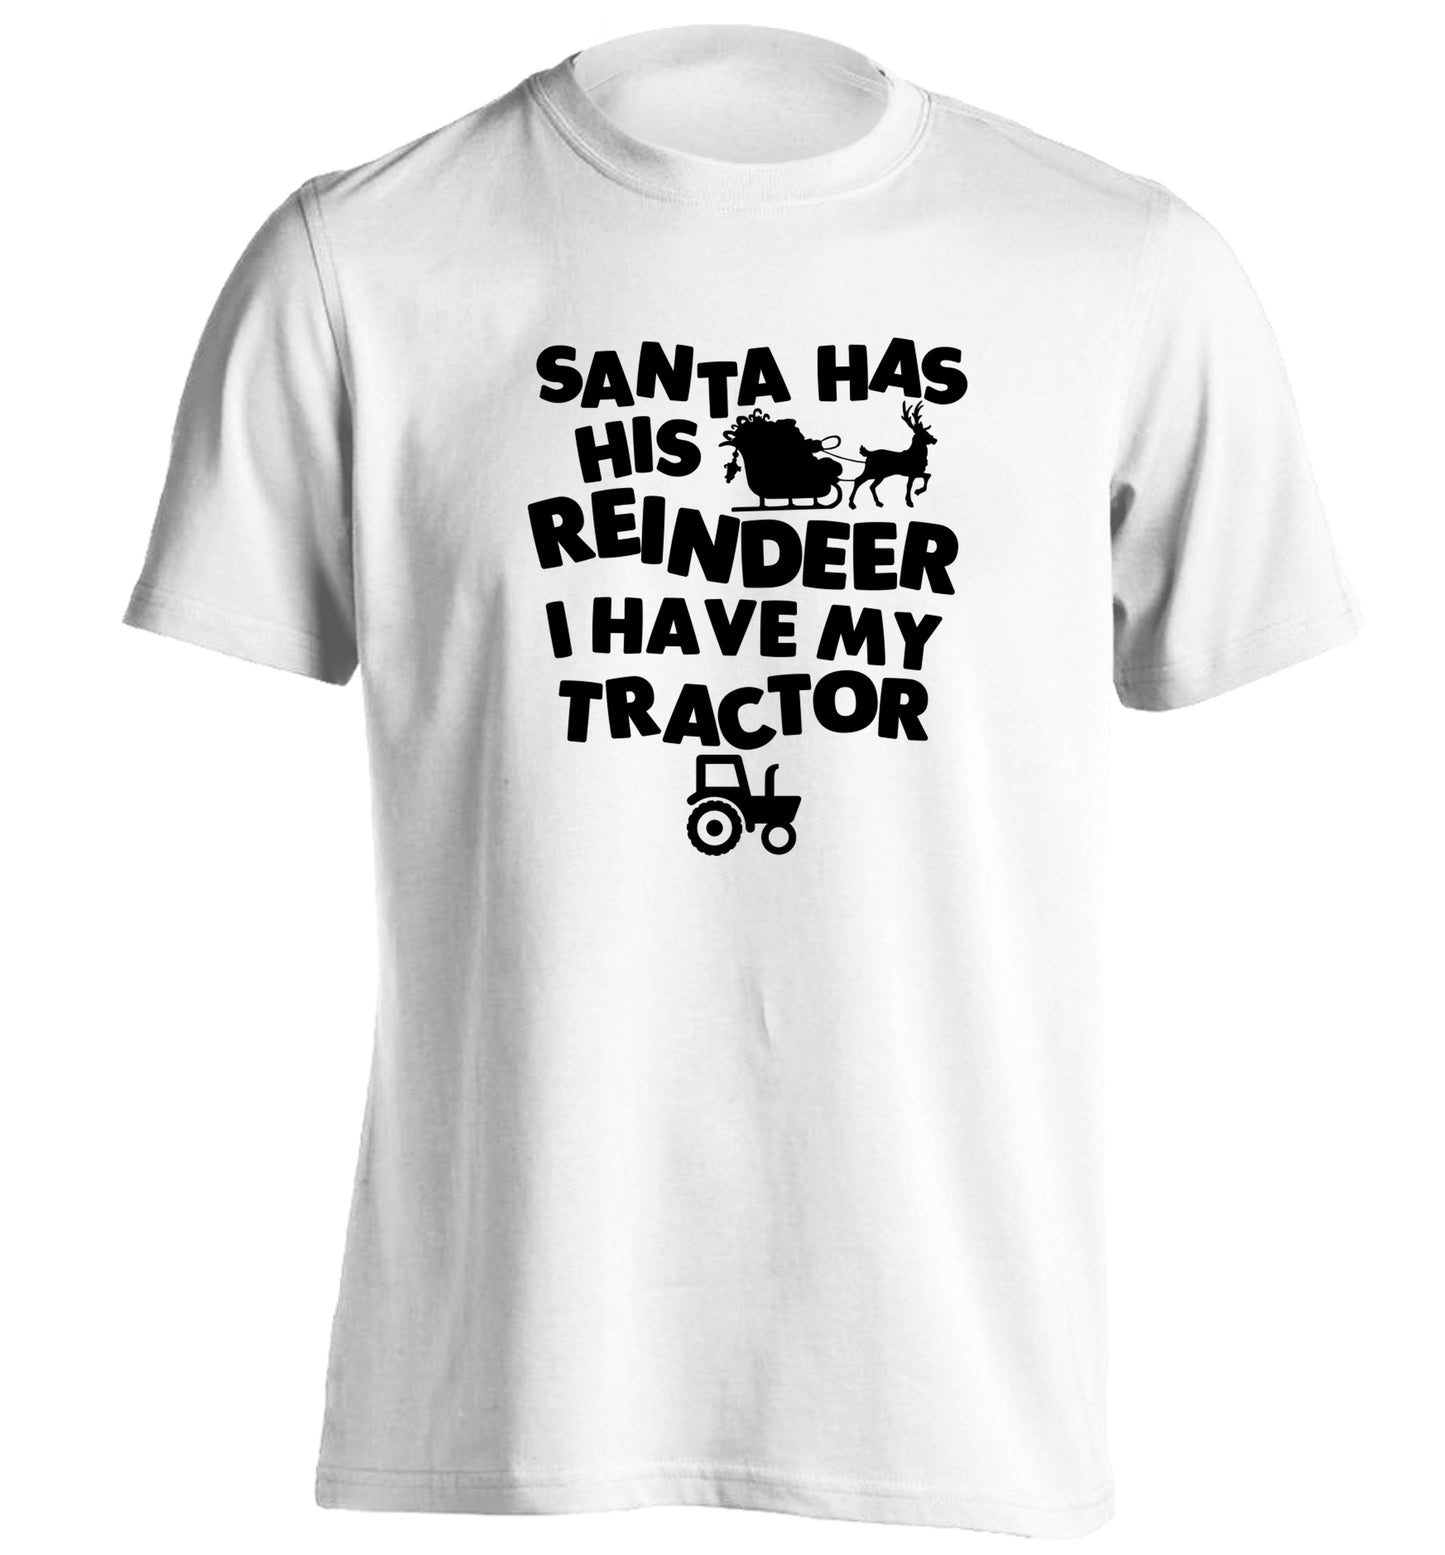 Santa has his reindeer I have my tractor adults unisex white Tshirt 2XL